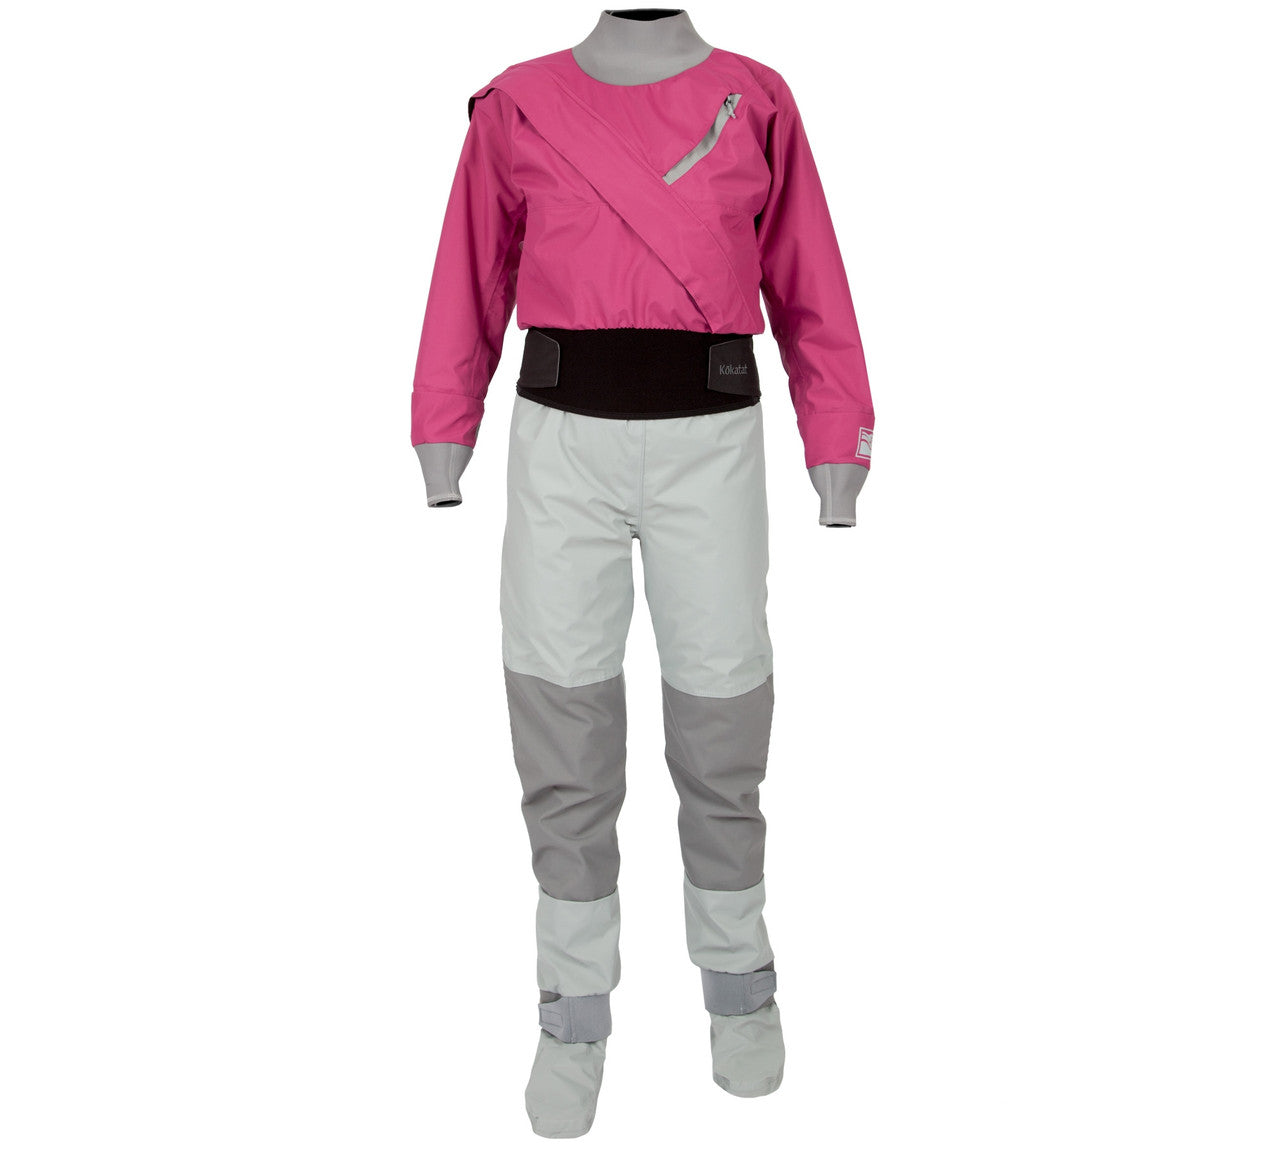 A Kokatat women's wetsuit in pink and grey, featuring a waterproof and breathable design.